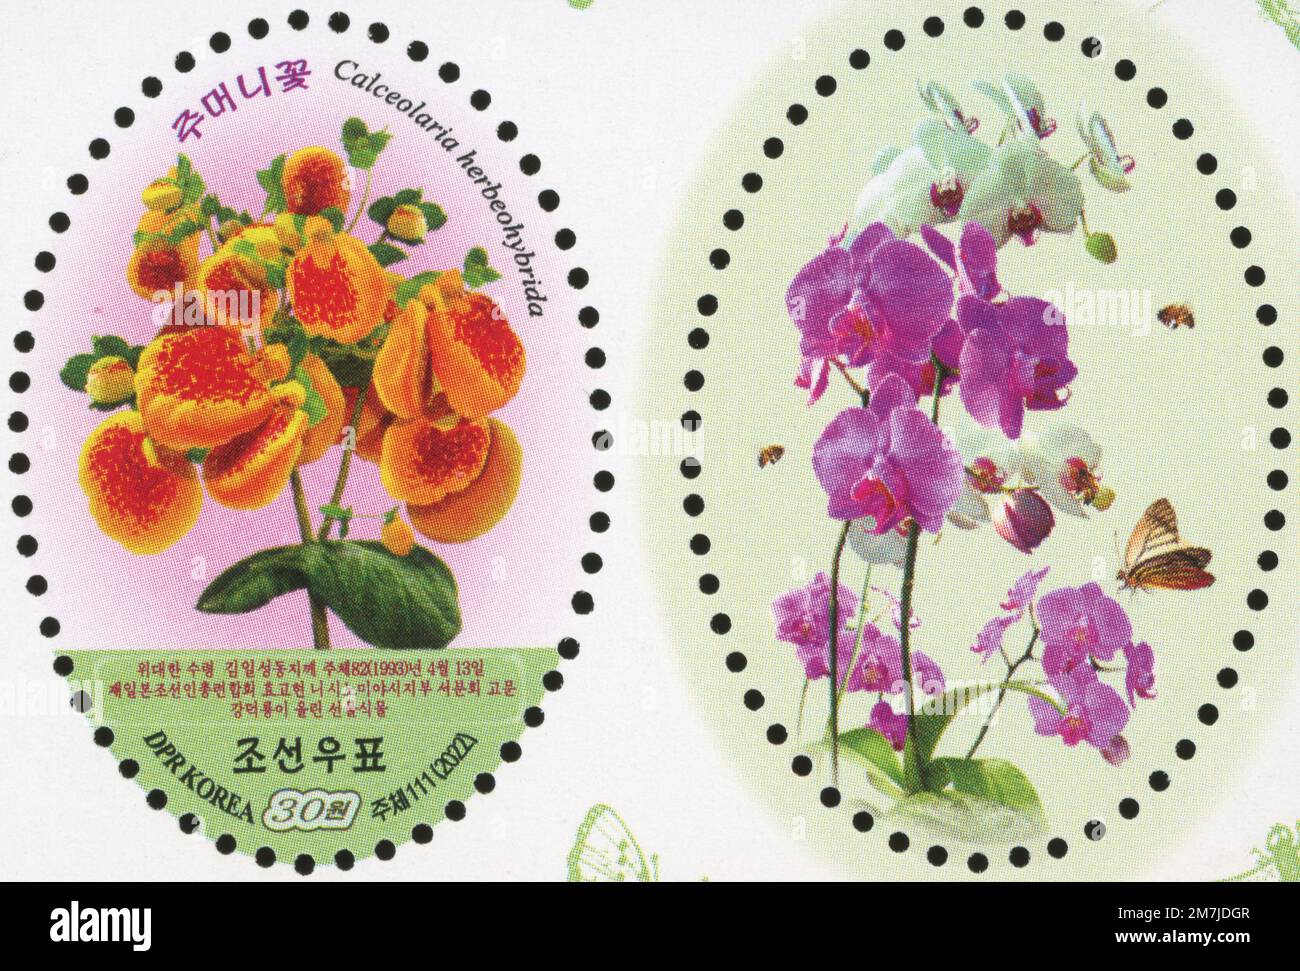 2022 North Korea stamp set Plants Gifted to North Korean Leaders.Calceolaria herbeohybrida given to Kim Il Sung by Koreans from Japan. Stock Photo